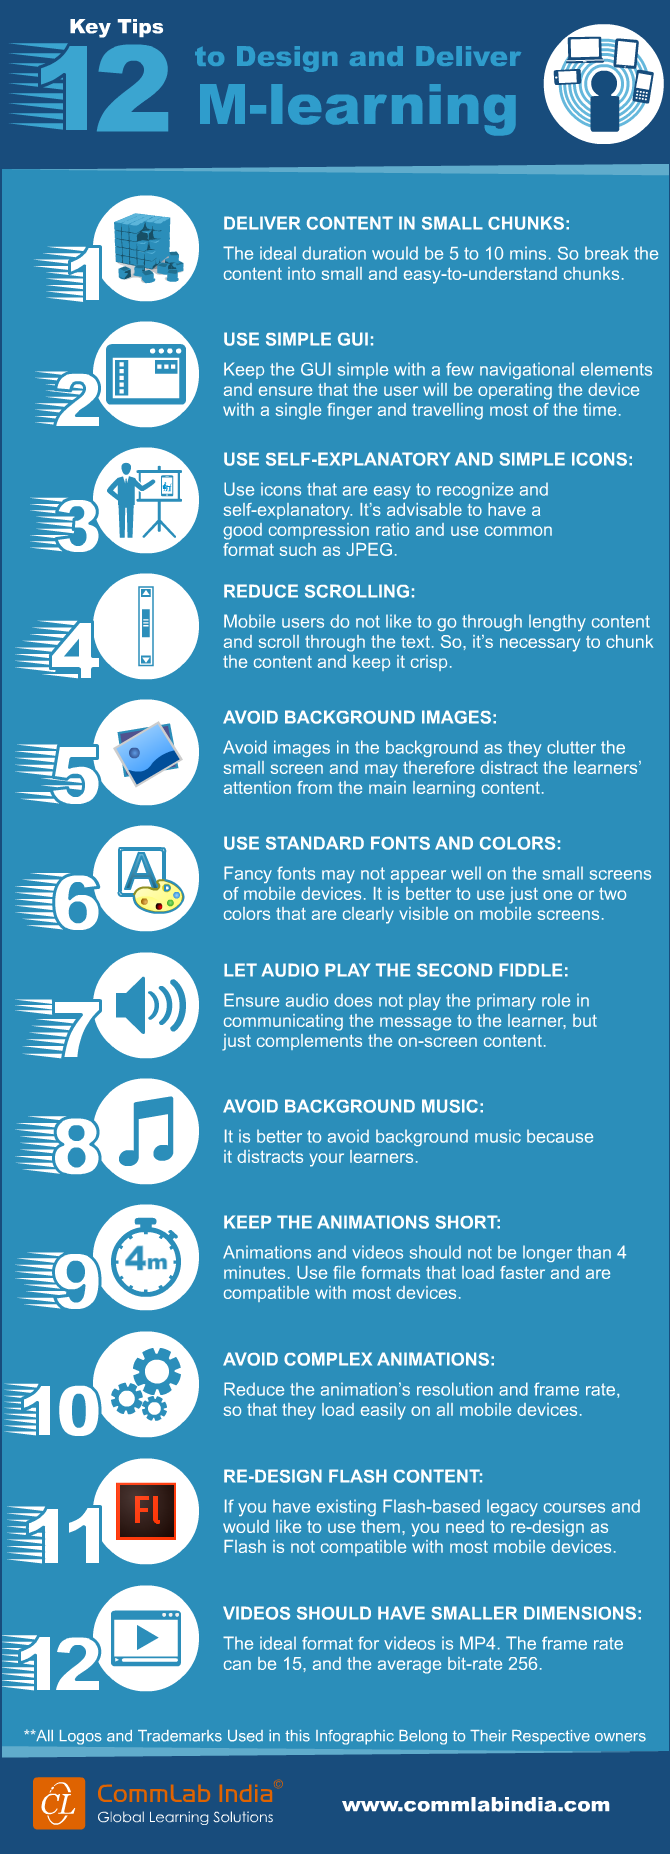 12 Key Tips to Design and Develop M-learning [Infographic]